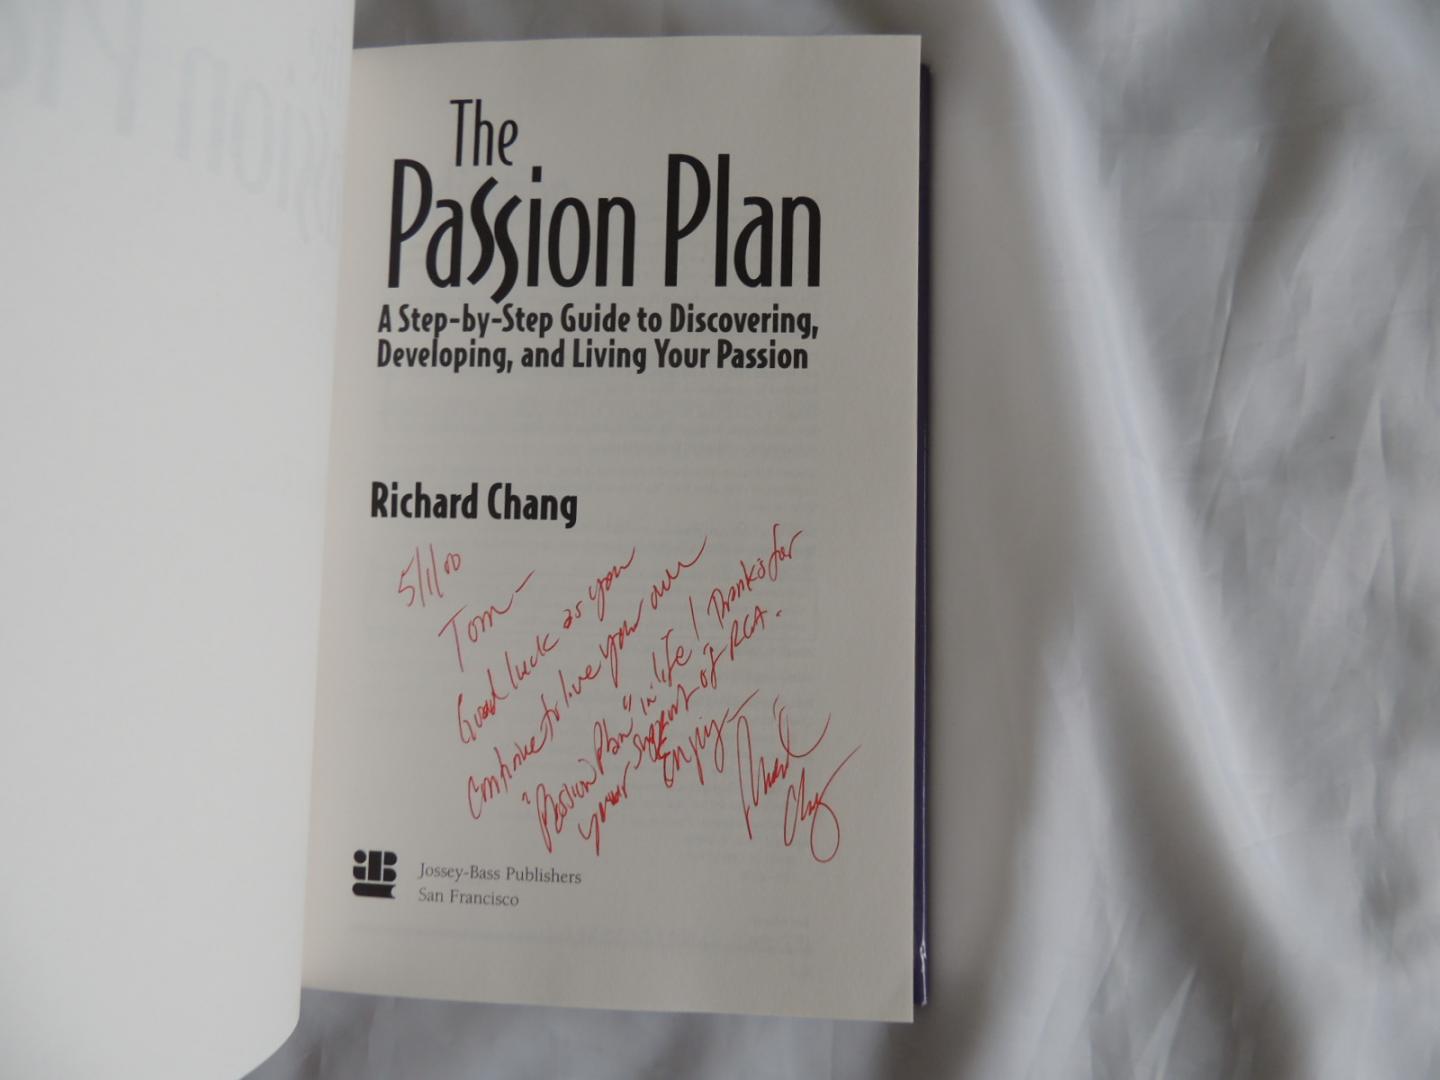 Chang, Richard - The Passion Plan - A step by step Guide to Discovering Developing and Living Your Passion --- GESIGNEERD ---